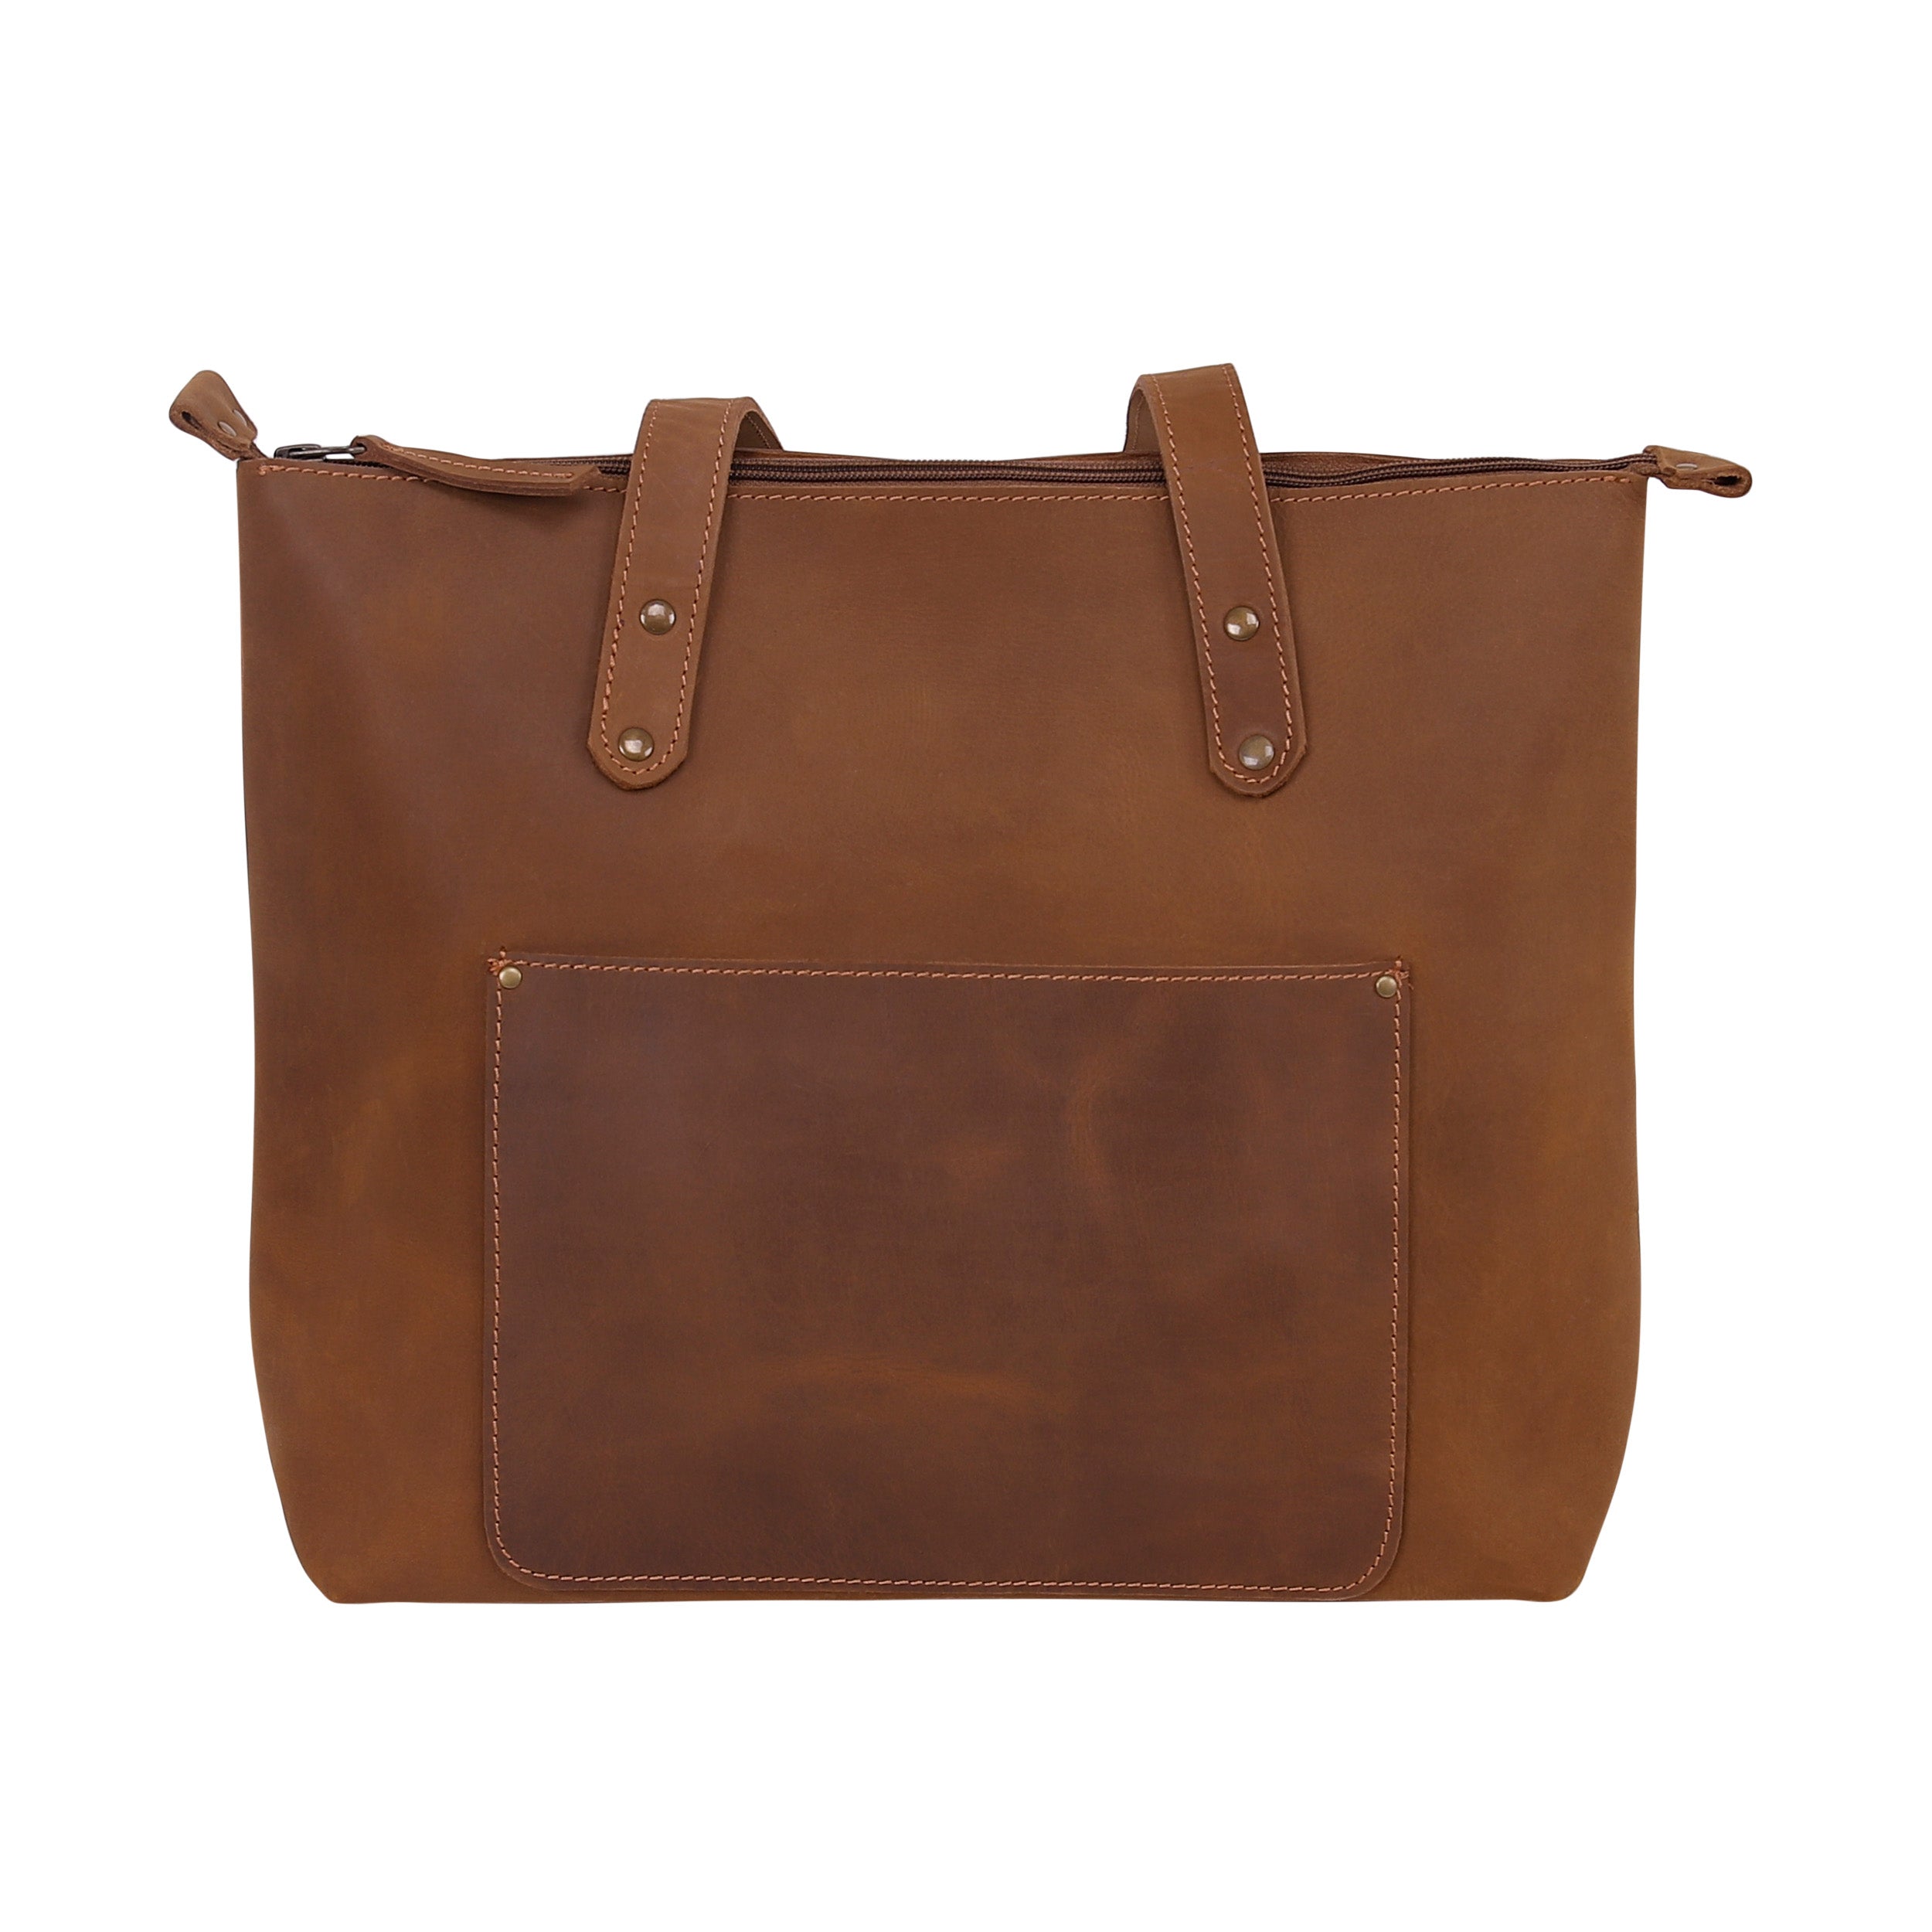 Leather Tote Bag 9912 - Light Brown